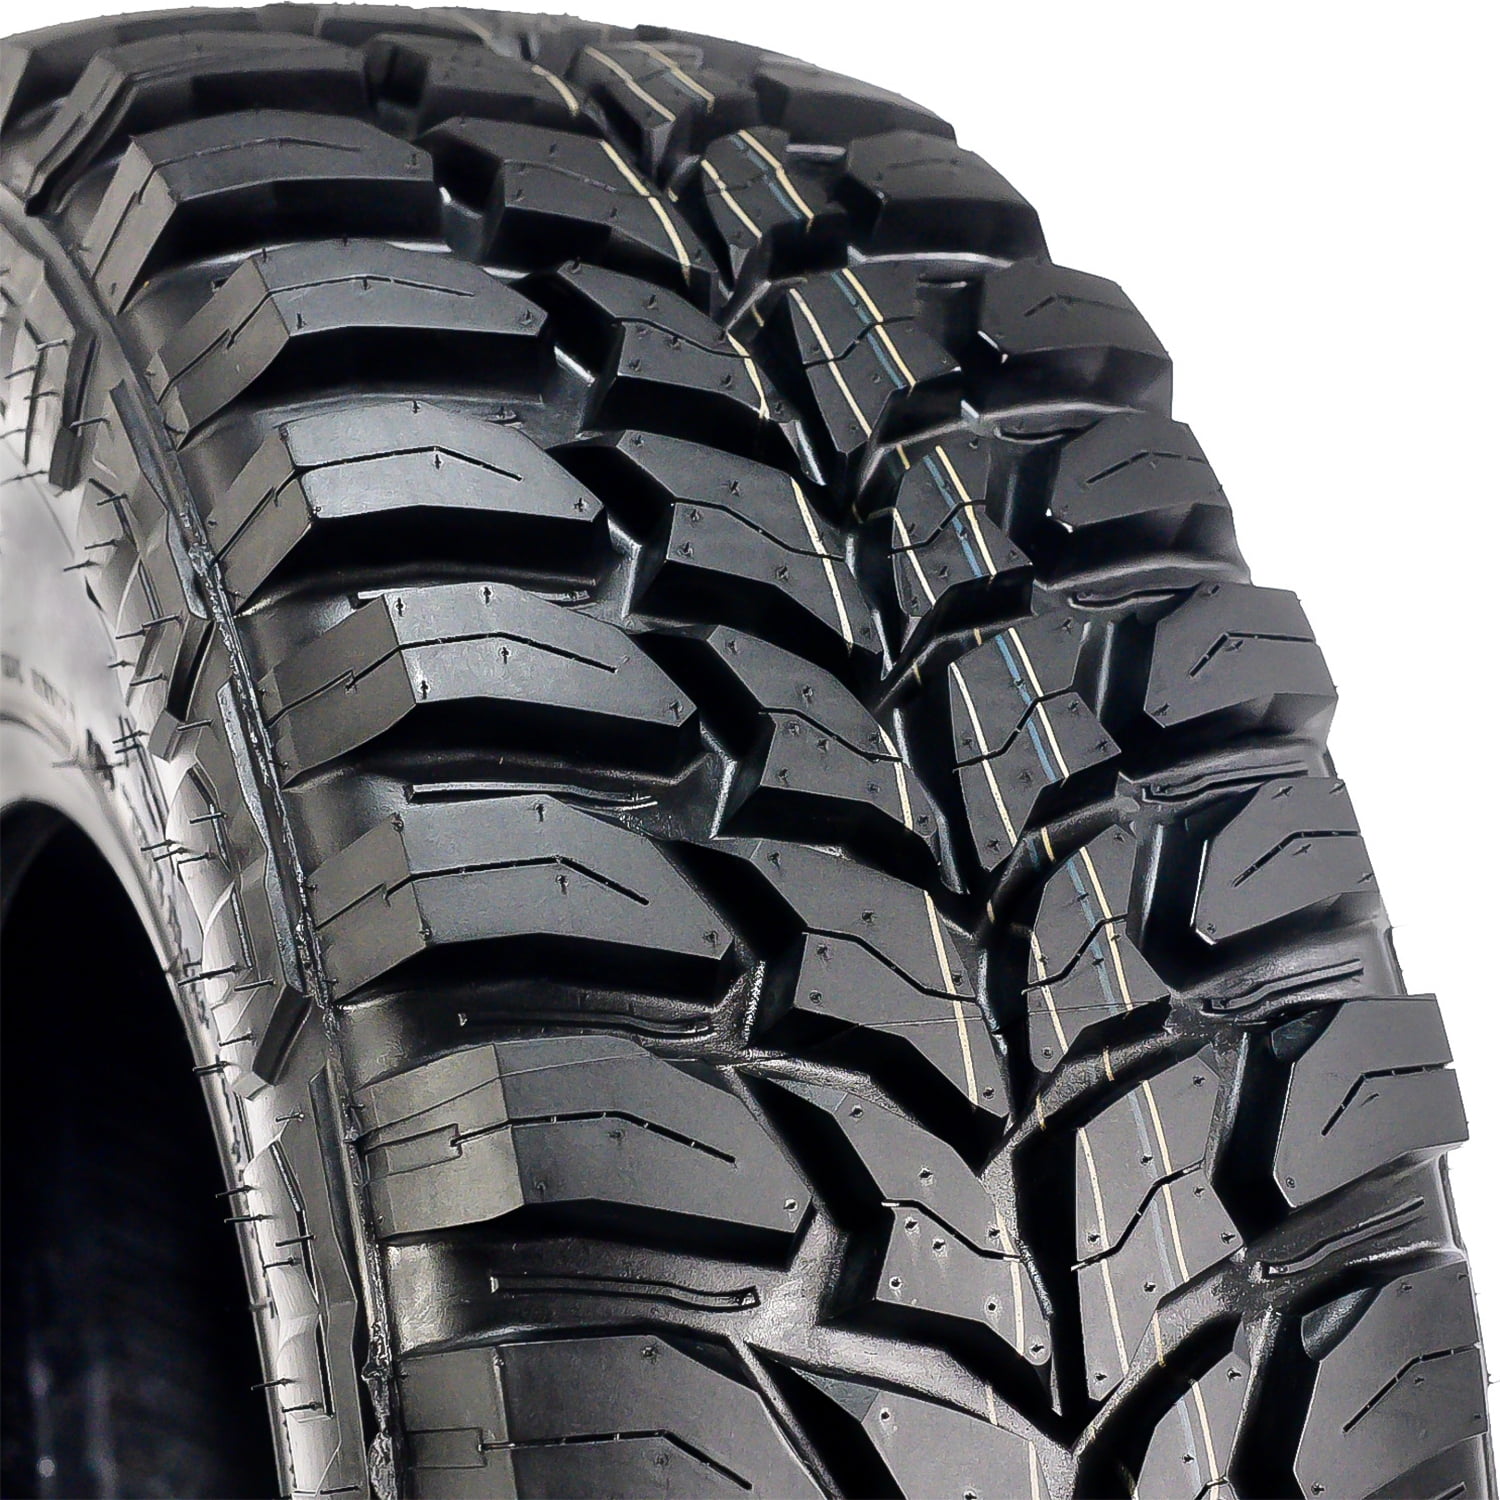 Road One Cavalry M/T Mud Tire RL1261 265 75 16 LT265/75R16 E Load Rated 